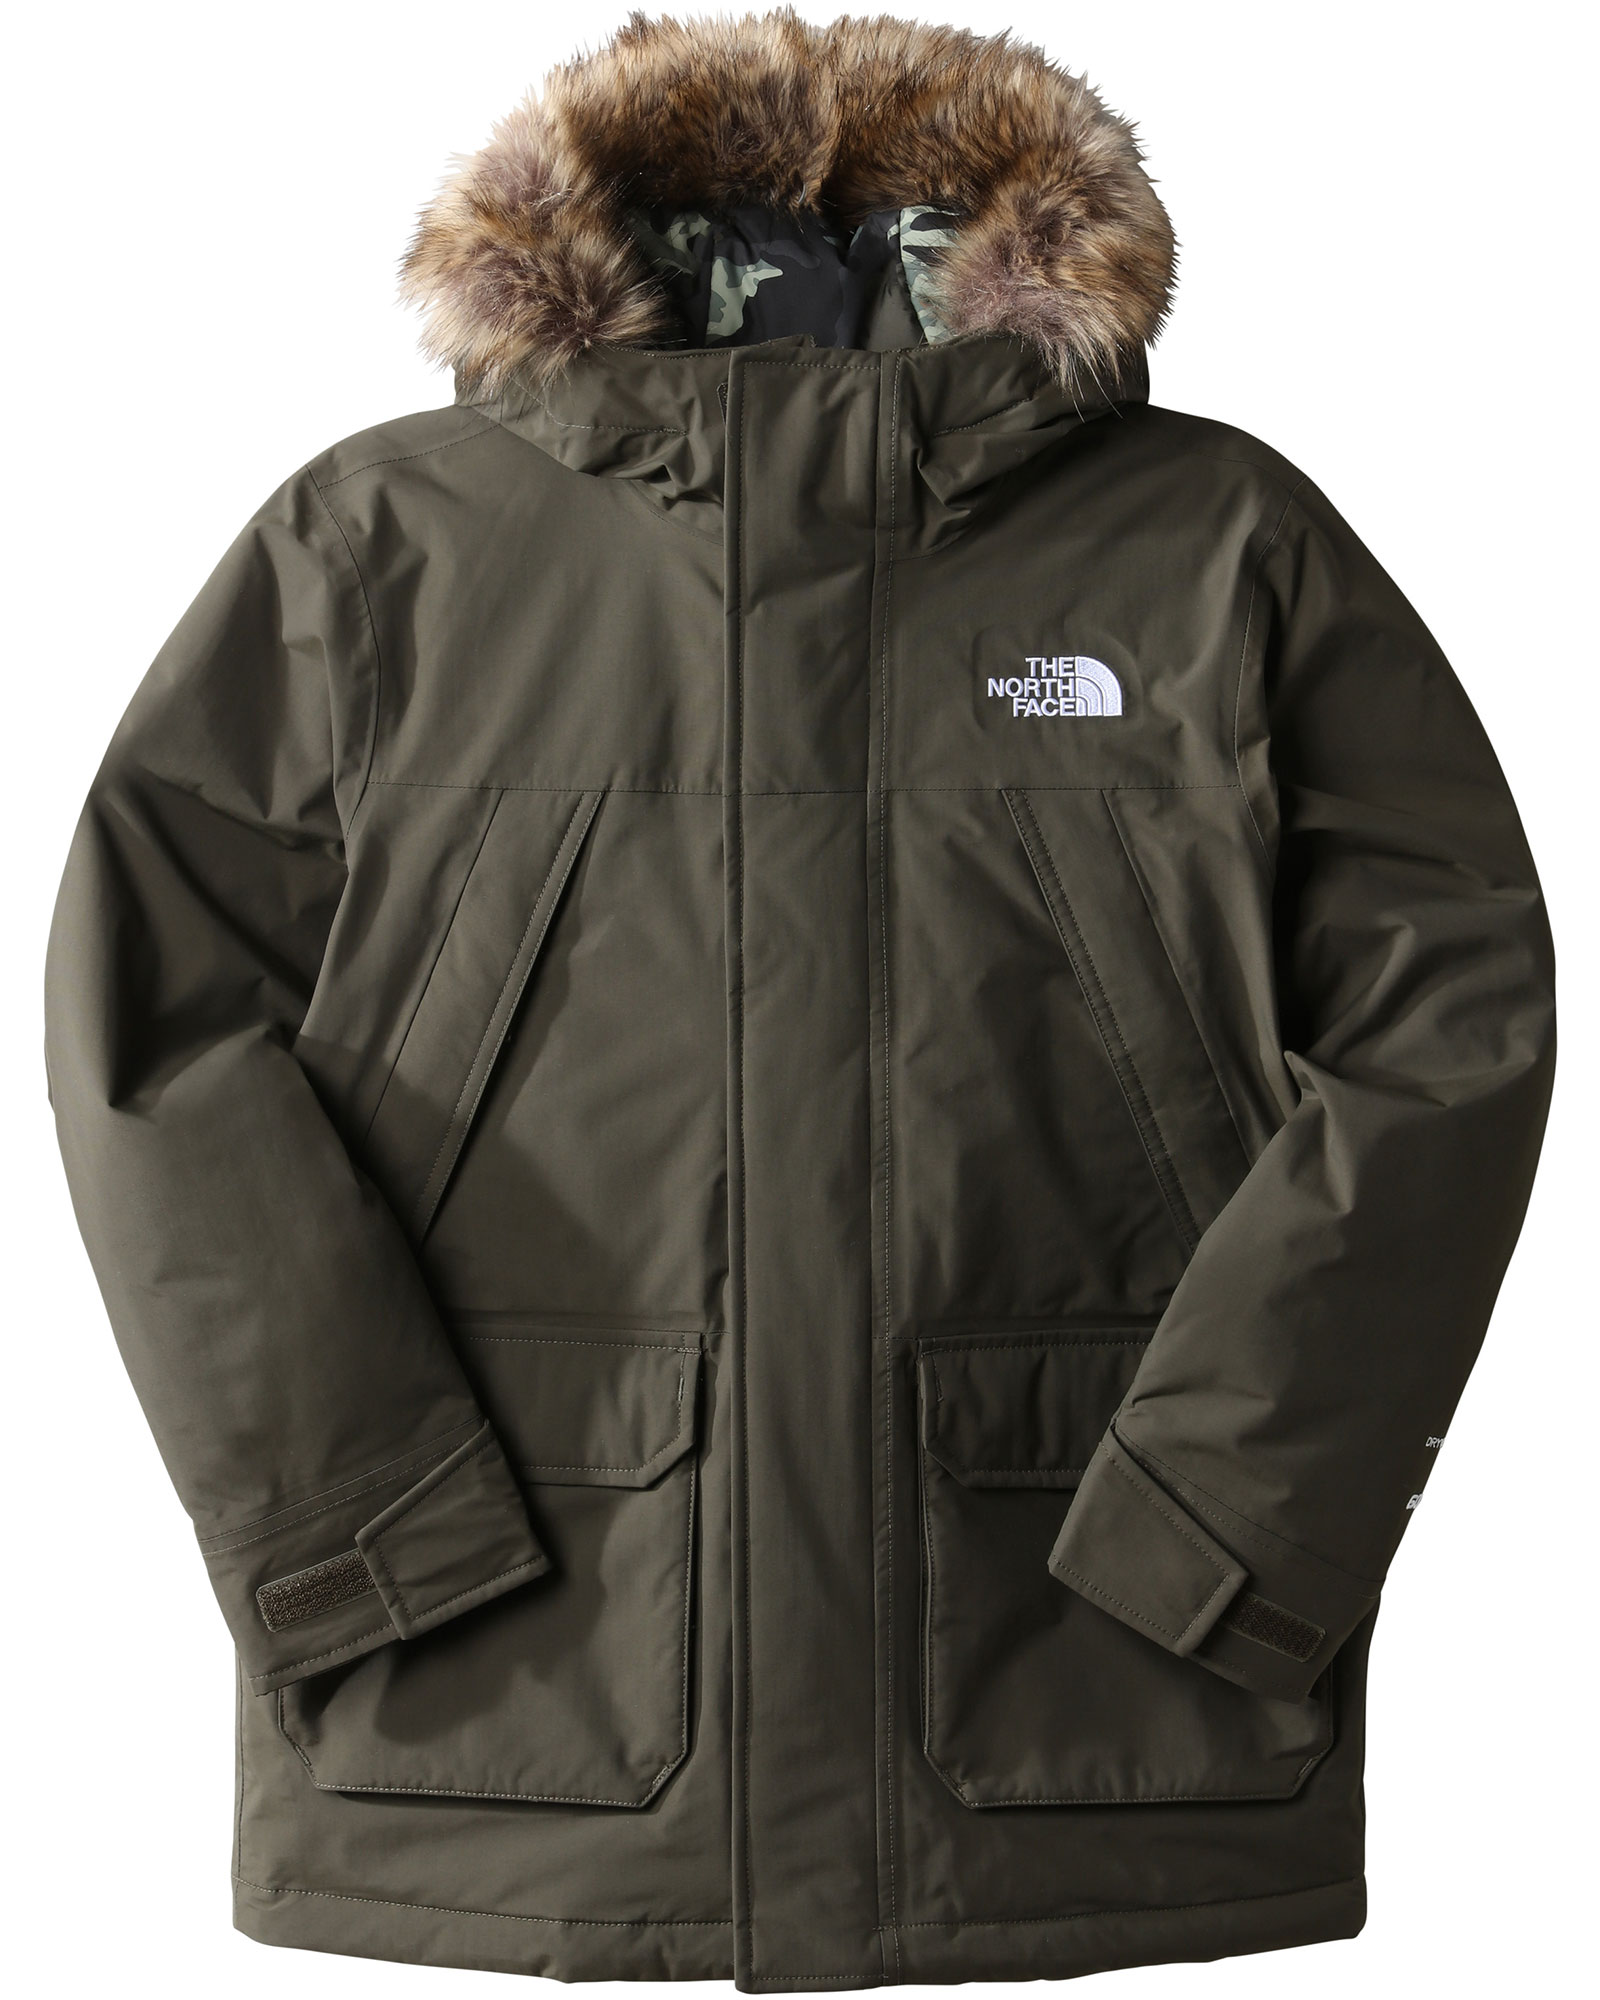 The North Face McMurdo Kids’ Parka Jacket - New Taupe Green L